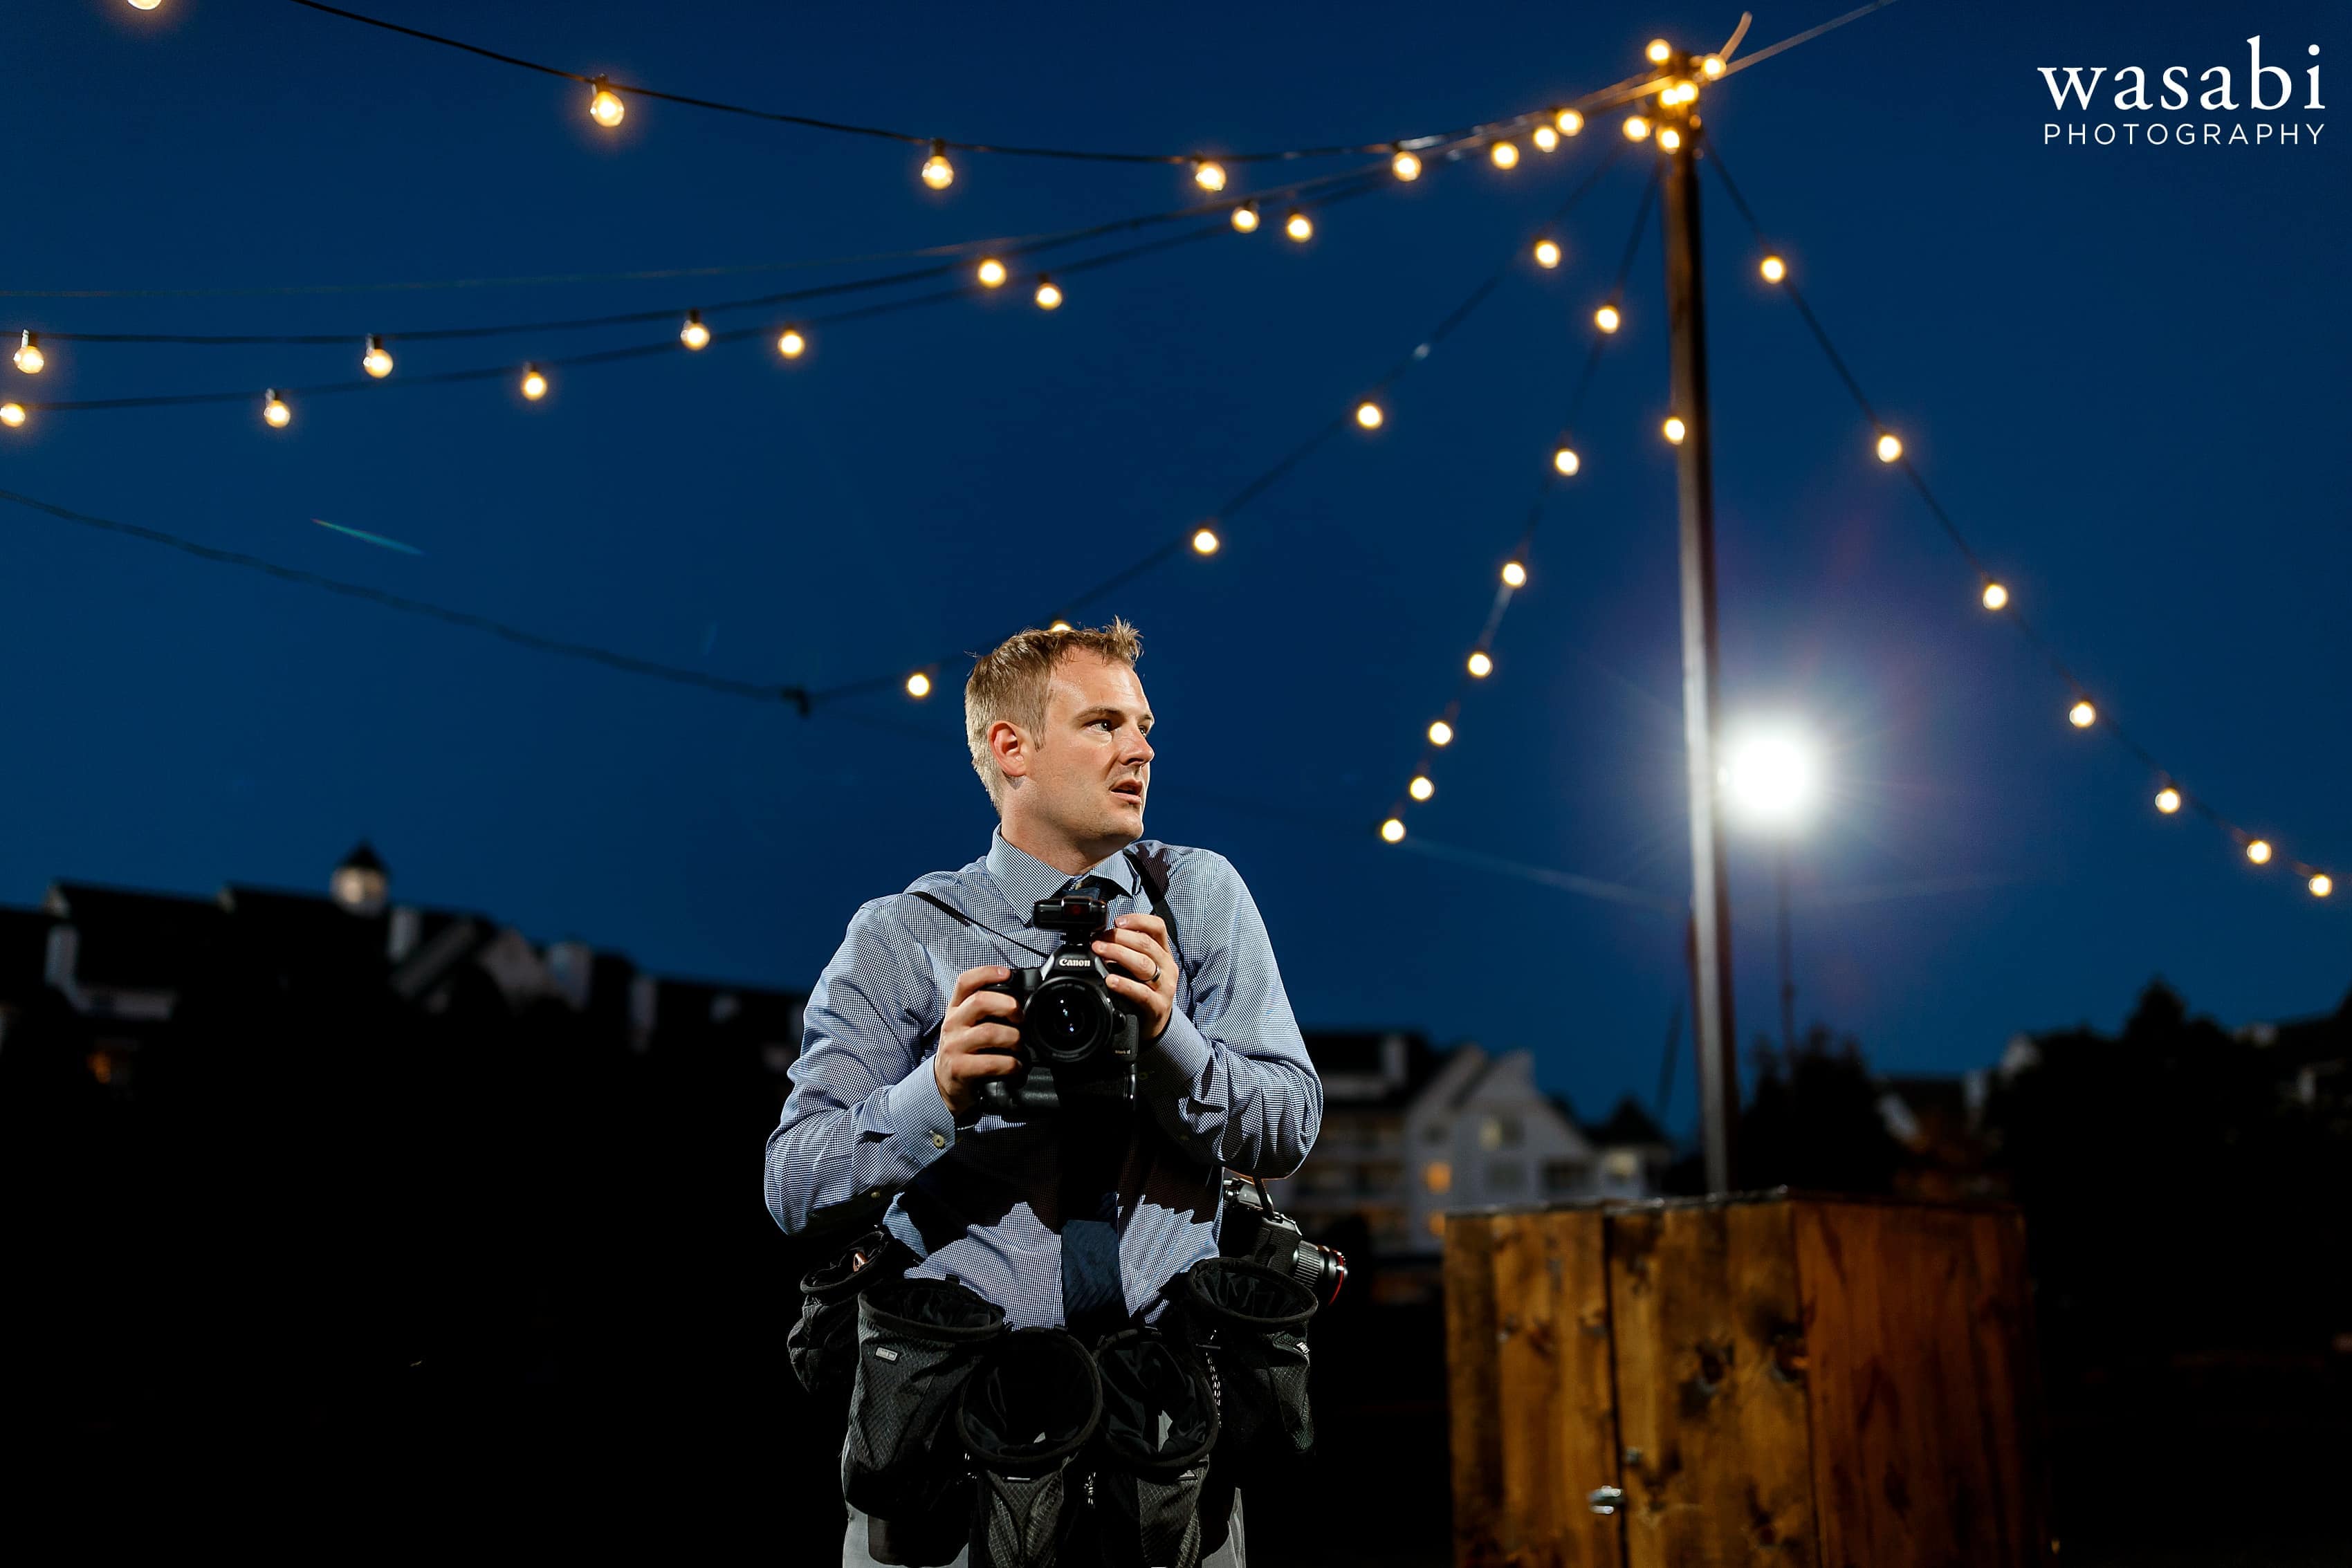 A Behind the Scenes look back at Wasabi Photography's 2018 wedding with photos of our team going above and beyond to make the best images for our couples!